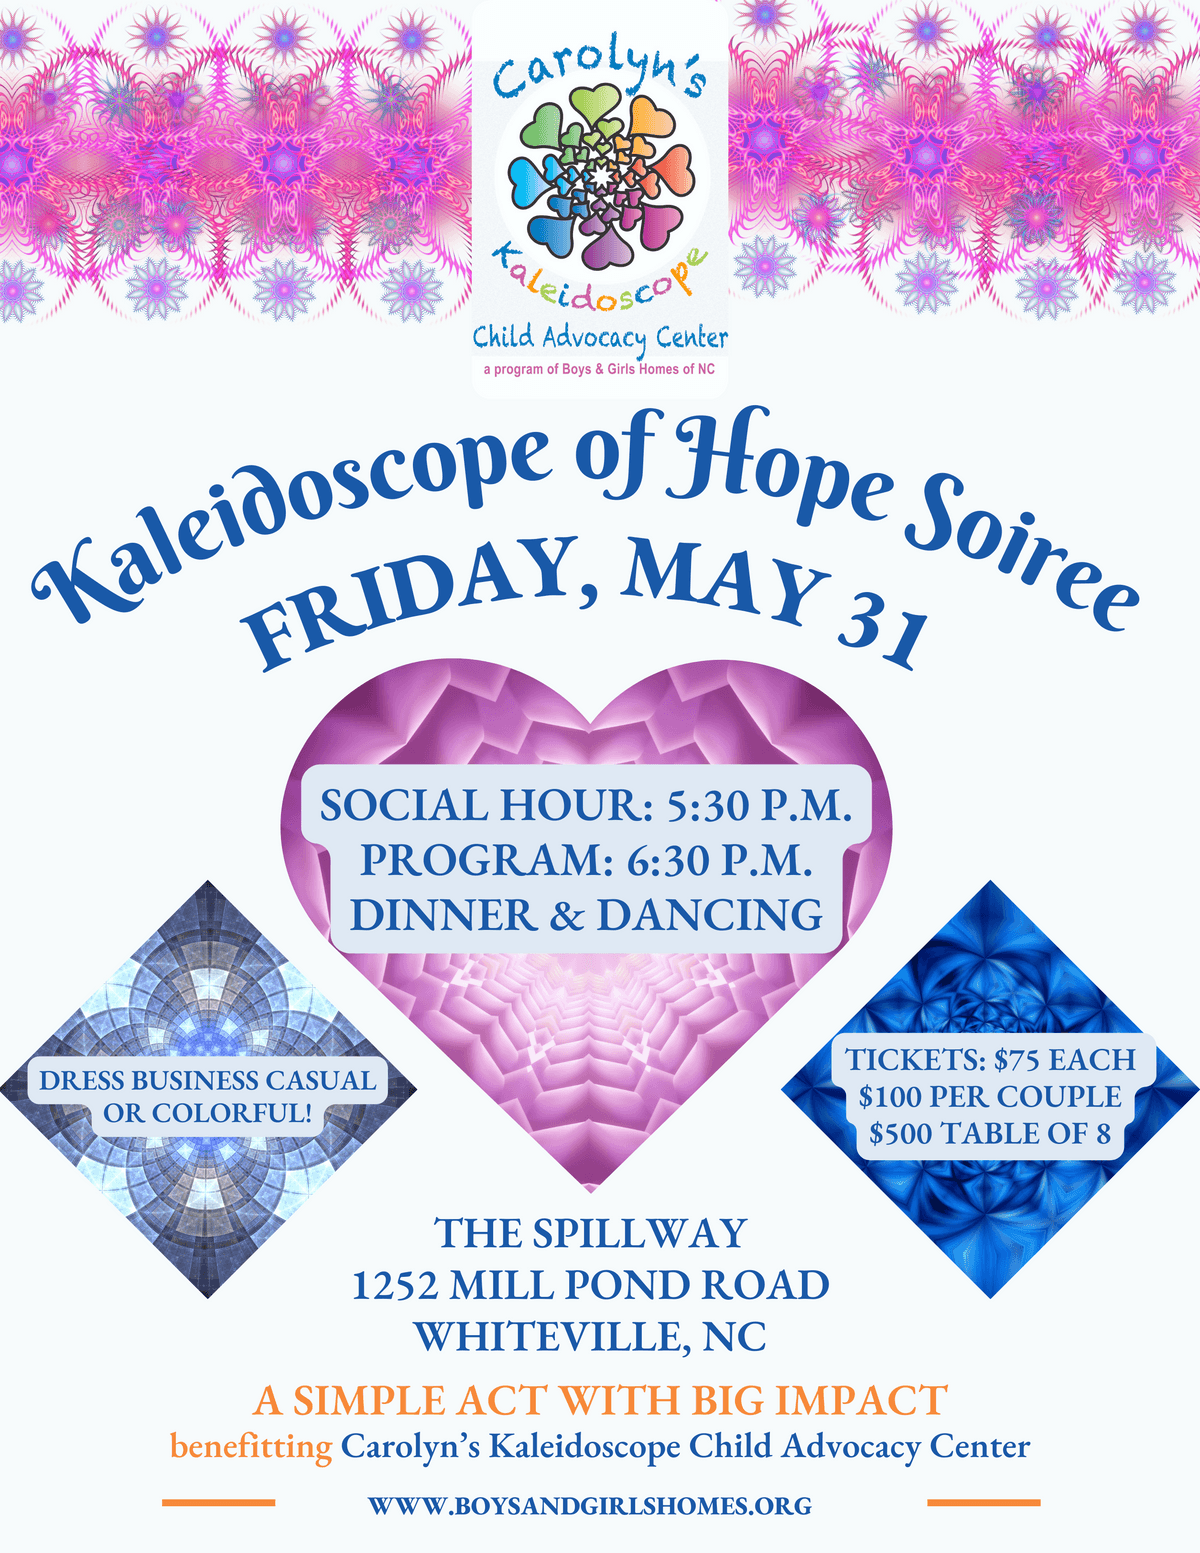 SAVE THE DATE: May 31 Kaleidoscope of Hope Soiree to benefit Carolyn's Kaleidoscope Child Advocacy Center